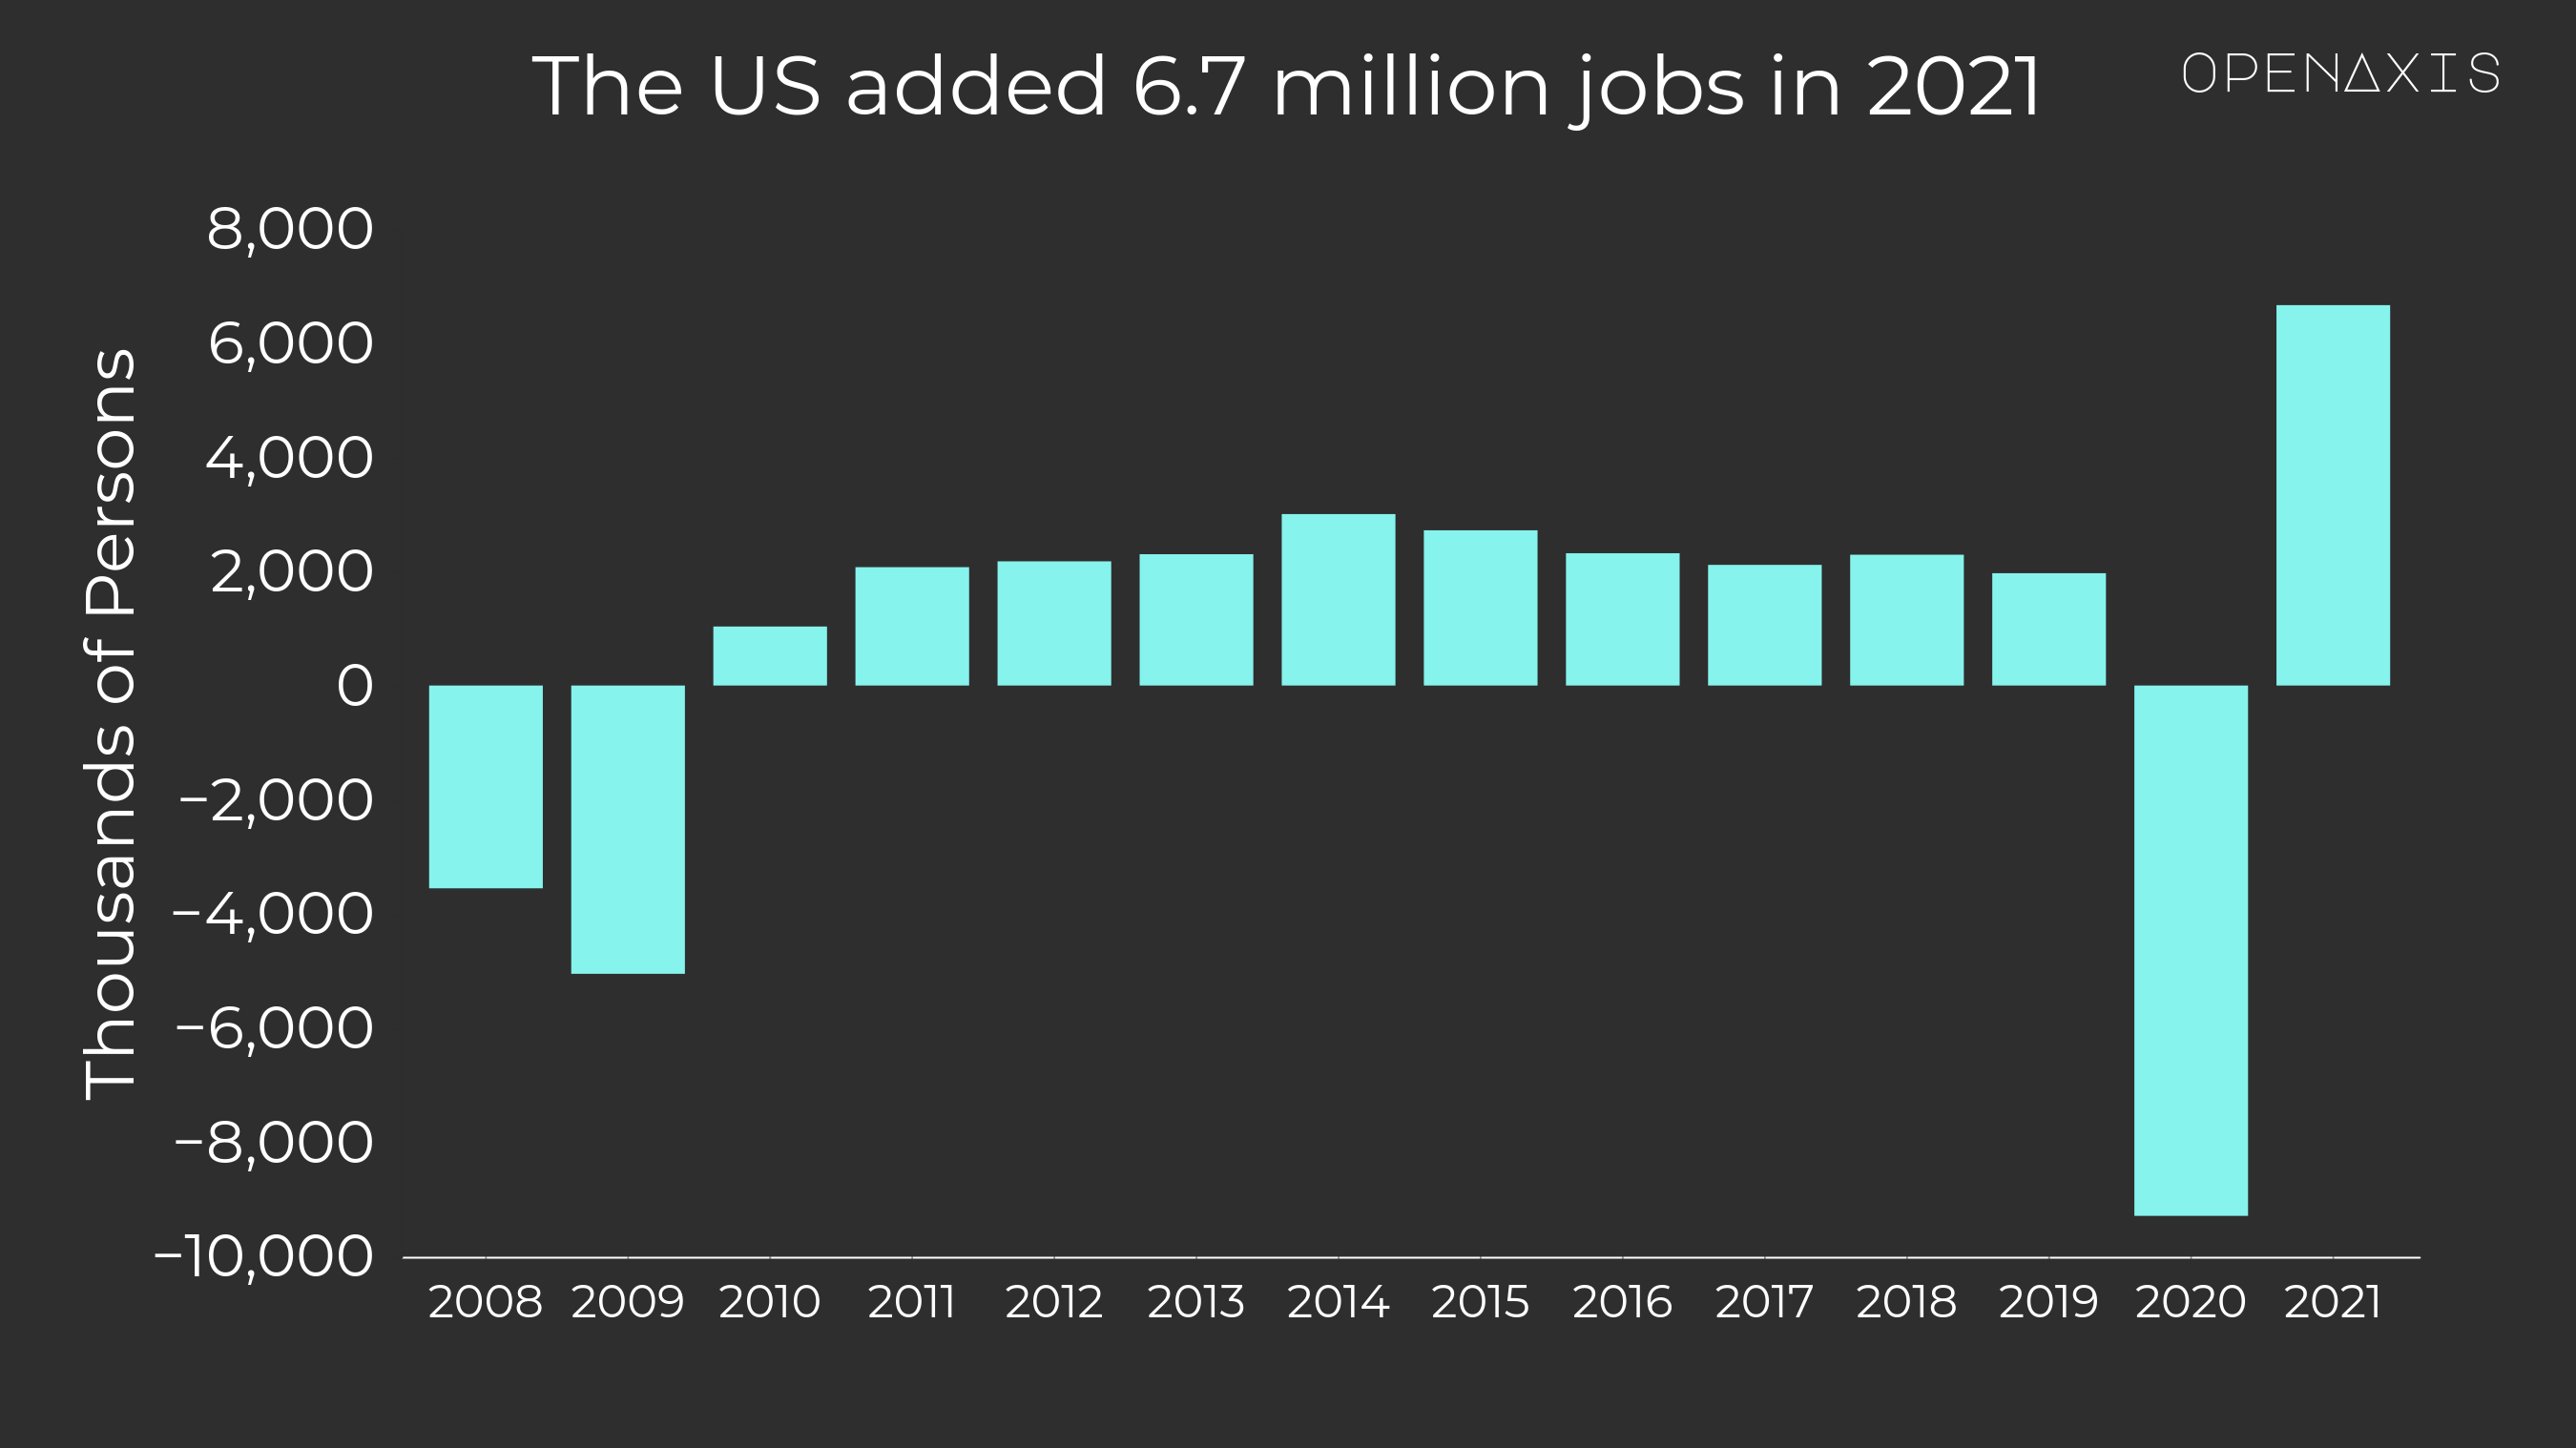 <p>The US economy added 6.7 million jobs in 2021 after losing 9.3 million jobs in 2020.</p><p><br /></p><p>All Employees, Total Nonfarm Change y-o-y</p><p>Change from preceding December, thousands of persons, non-farm.</p><p><br /></p><p><a href="https://app.openaxis.com/projects/openaxis/State-of-the-Union-2022" target="_blank">Return to State of the Union 2022 project by OpenAxis</a></p><p>﻿<a href="/search?q=%23economy" target="_self">#economy</a>﻿ ﻿<a href="/search?q=%23jobs" target="_self">#jobs</a>﻿ ﻿<a href="/search?q=%23sotu" target="_self">#sotu</a>﻿ ﻿<a href="/search?q=%23fred" target="_self">#fred</a>﻿ </p>